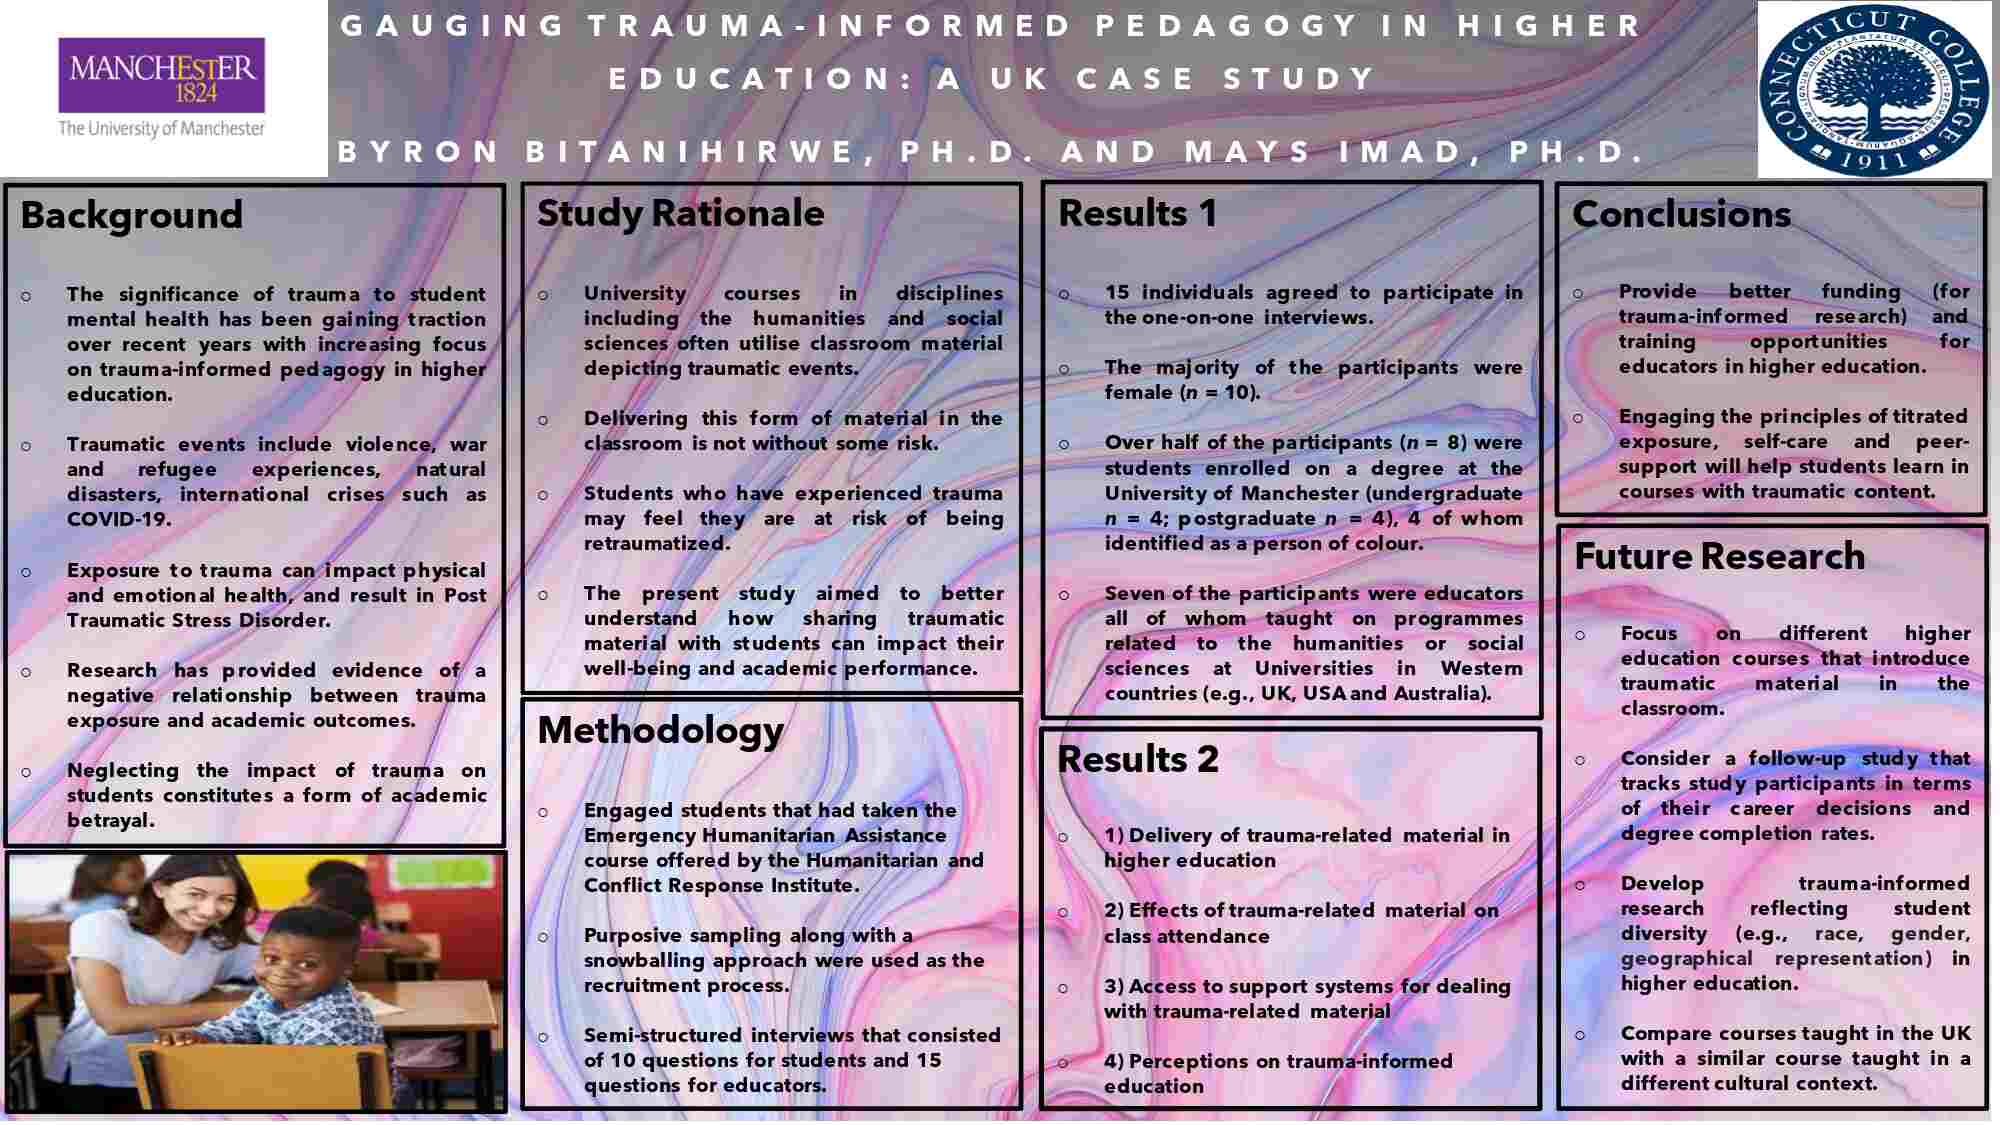 An image of a digital poster named A gauging trauma: informed pedagogy in higher education - A UK case study.